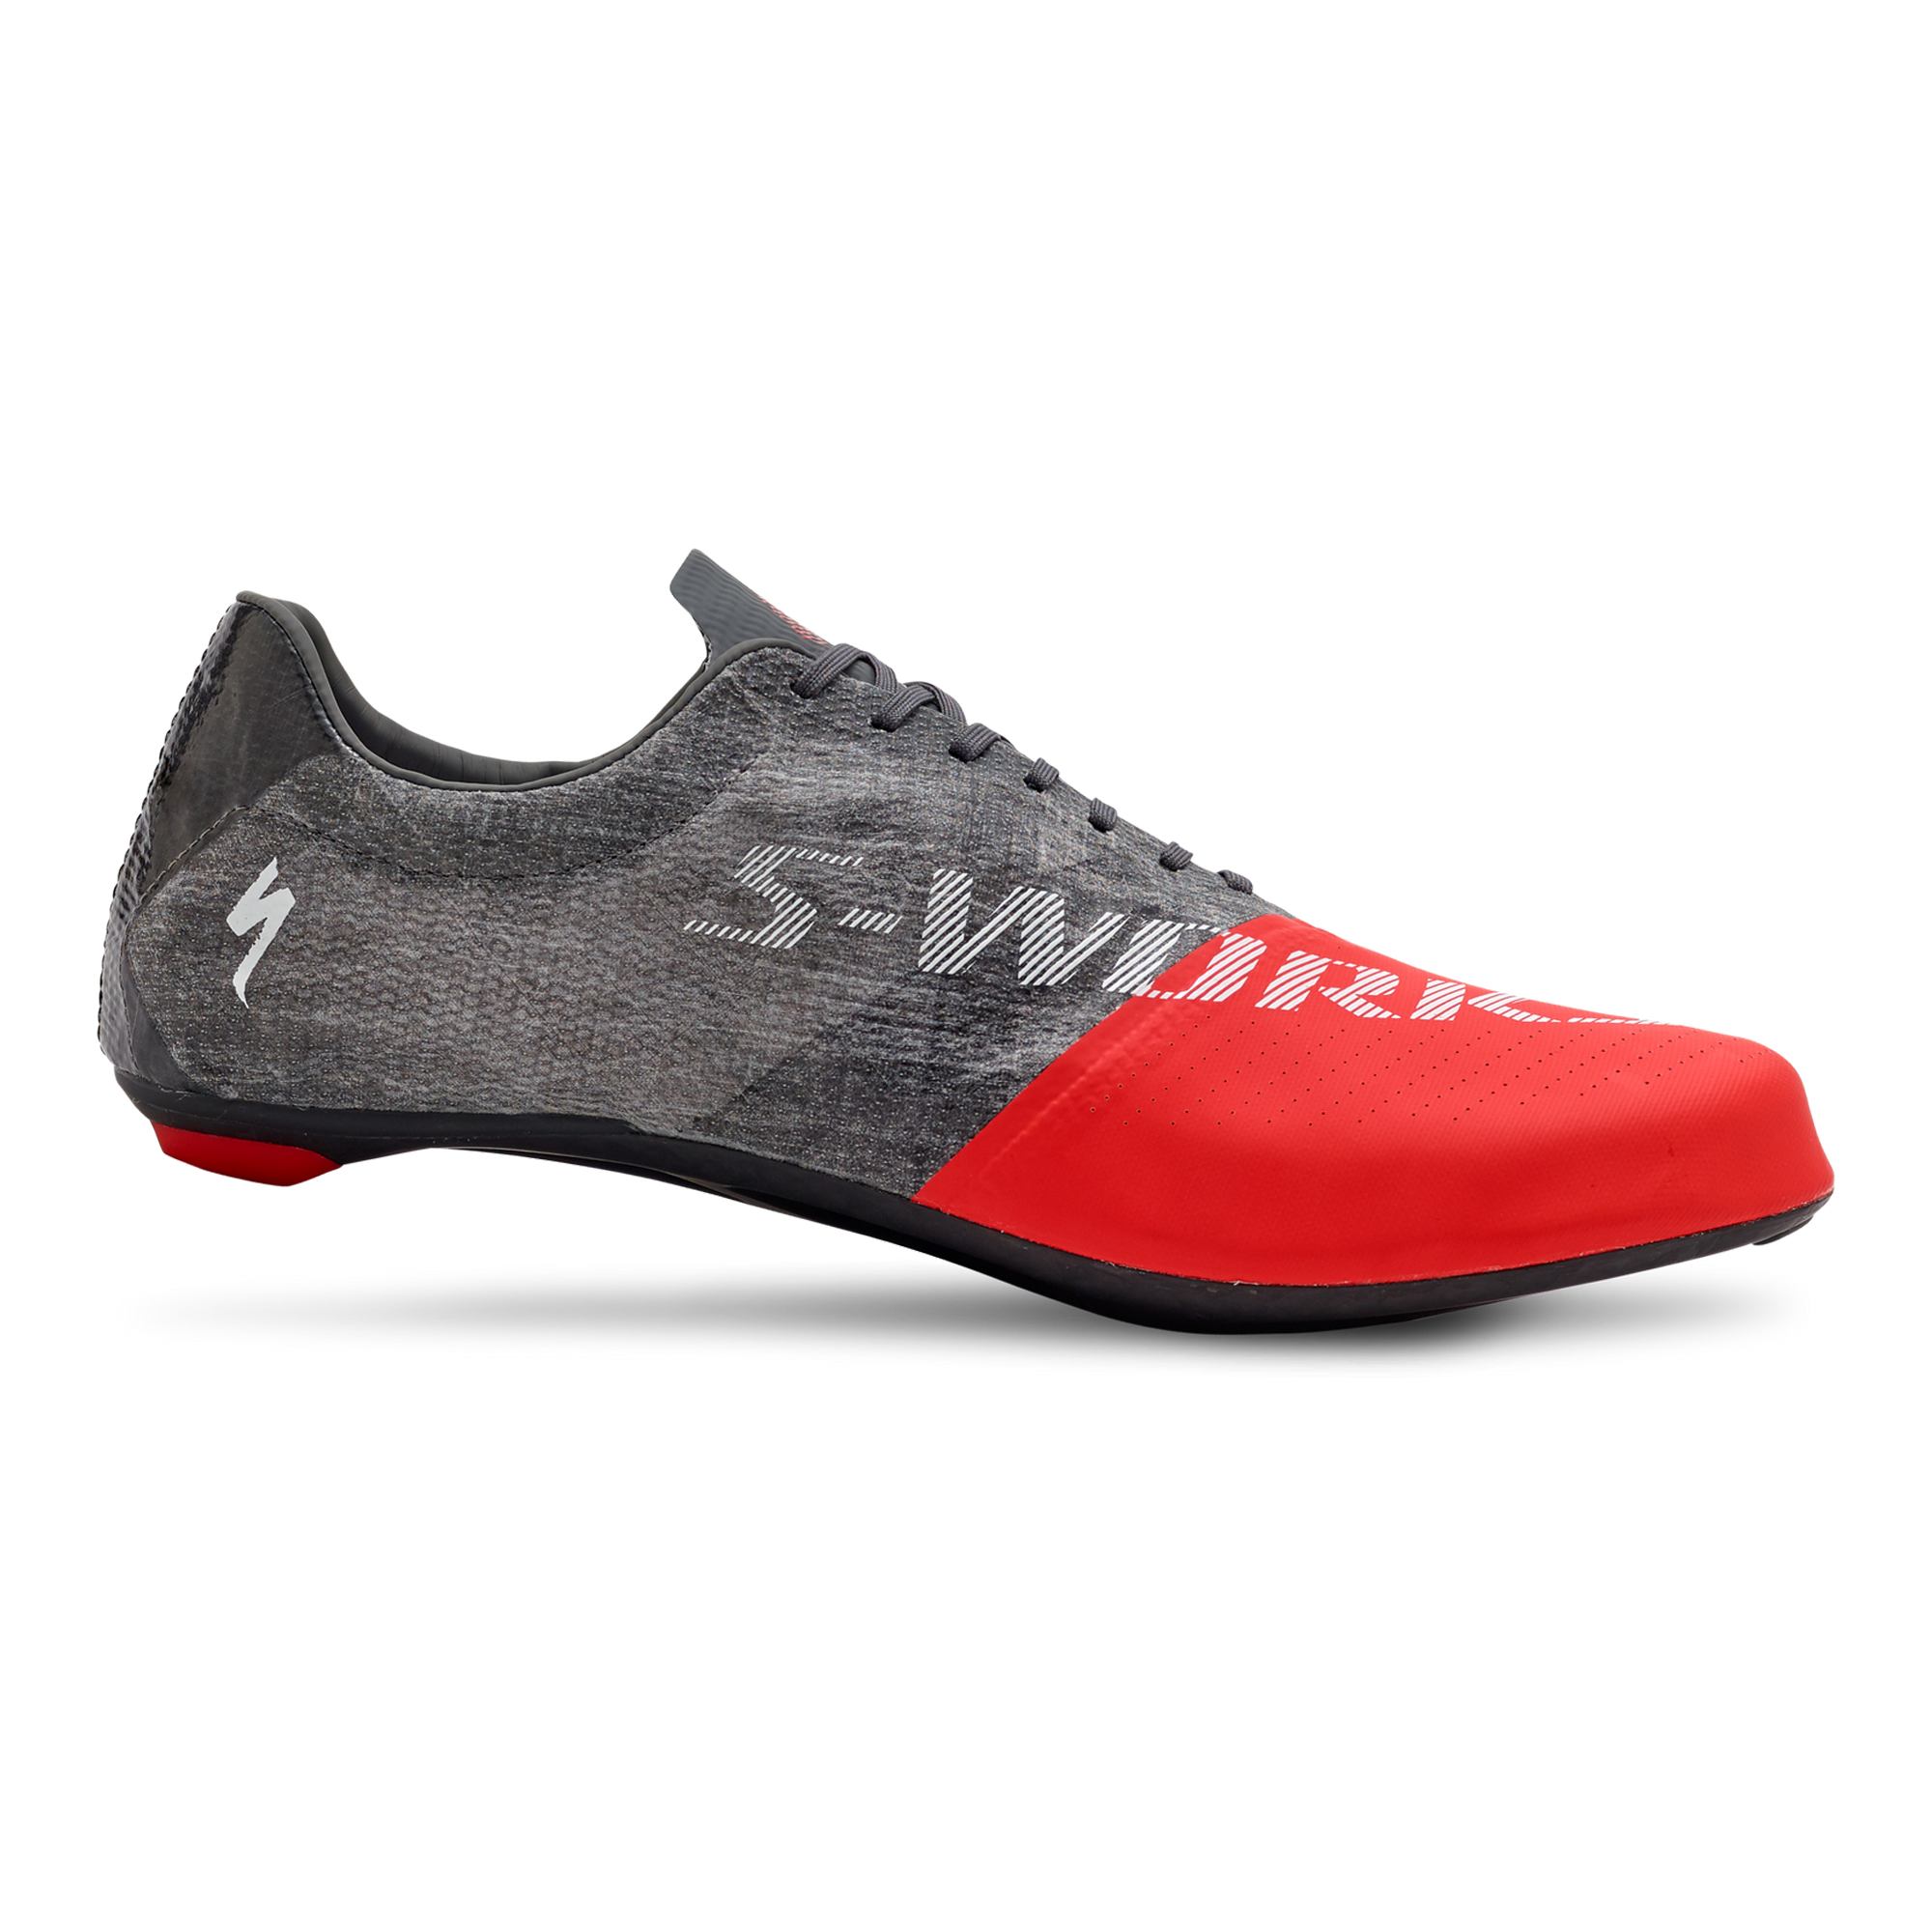 S-Works EXOS 99 Road Shoes – LTD